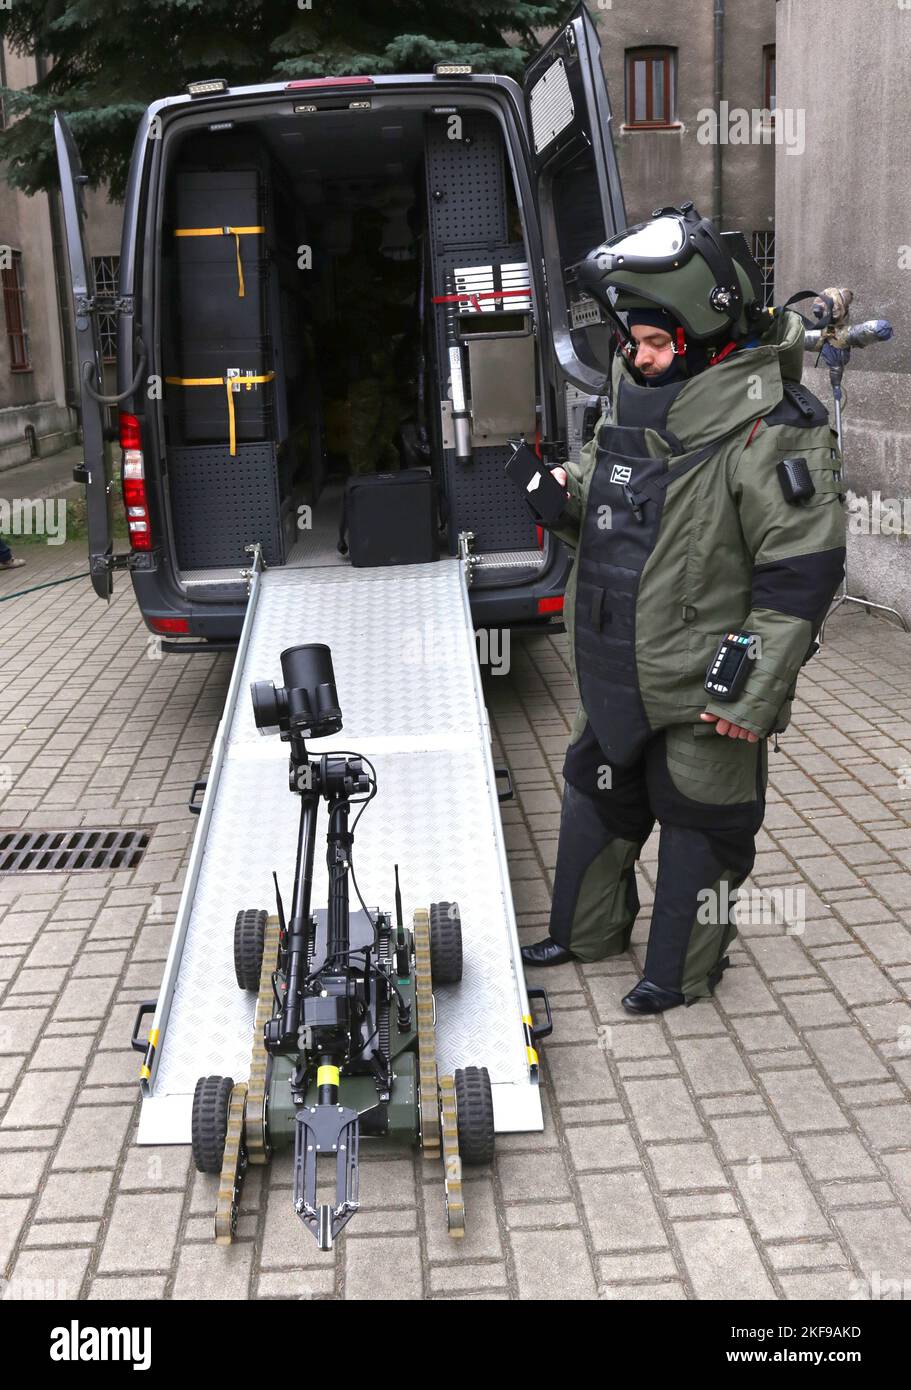 Crcaow. Krakow. Poland. Remote bomb disposal robot used by police and officer wearing  heavy blast suit. Stock Photo